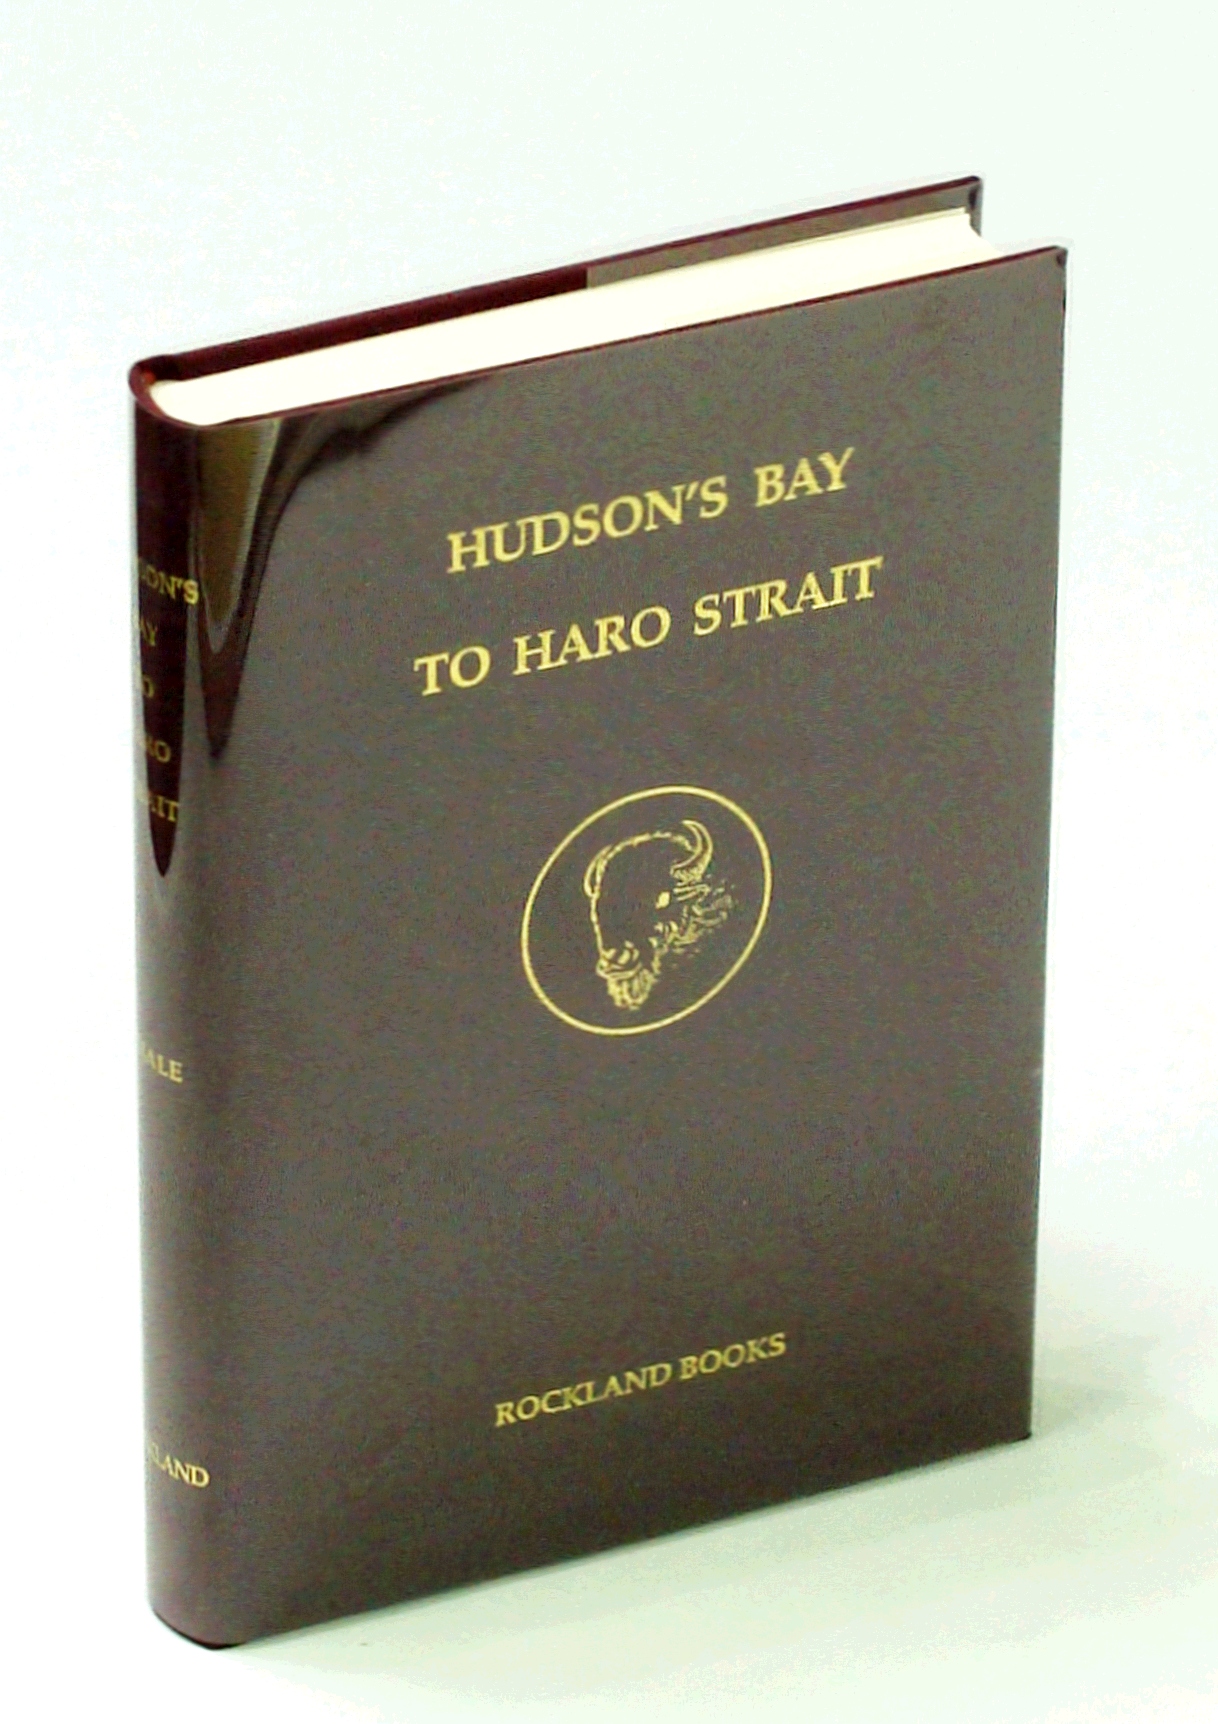 WHALE, G.J. KIM - Hudson's Bay to Haro Strait - Books on Western Canada and the Pacific Northwest, a Collector's Guide